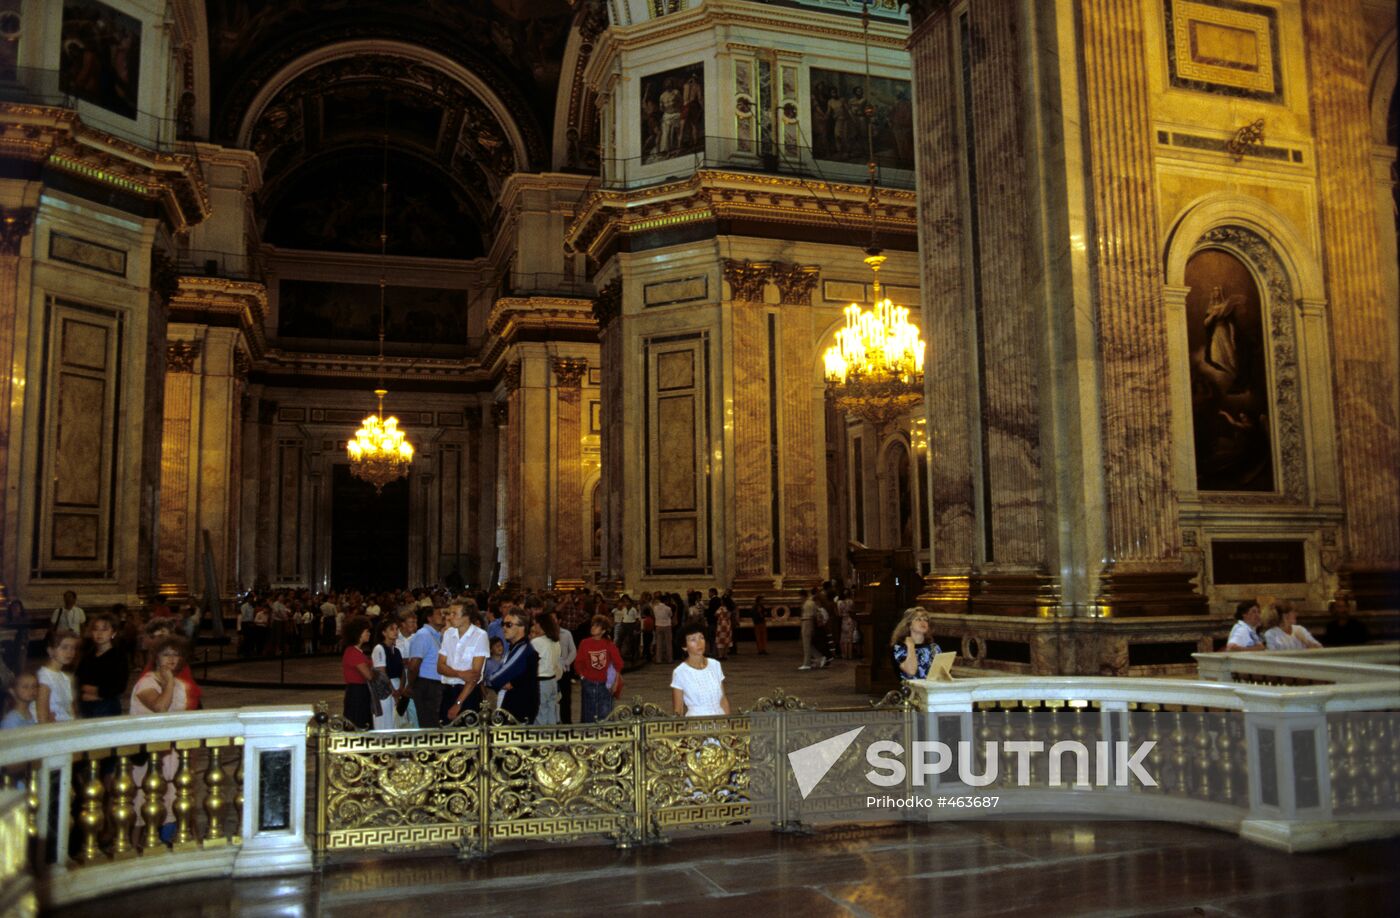 In Saint Isaac's Cathedral